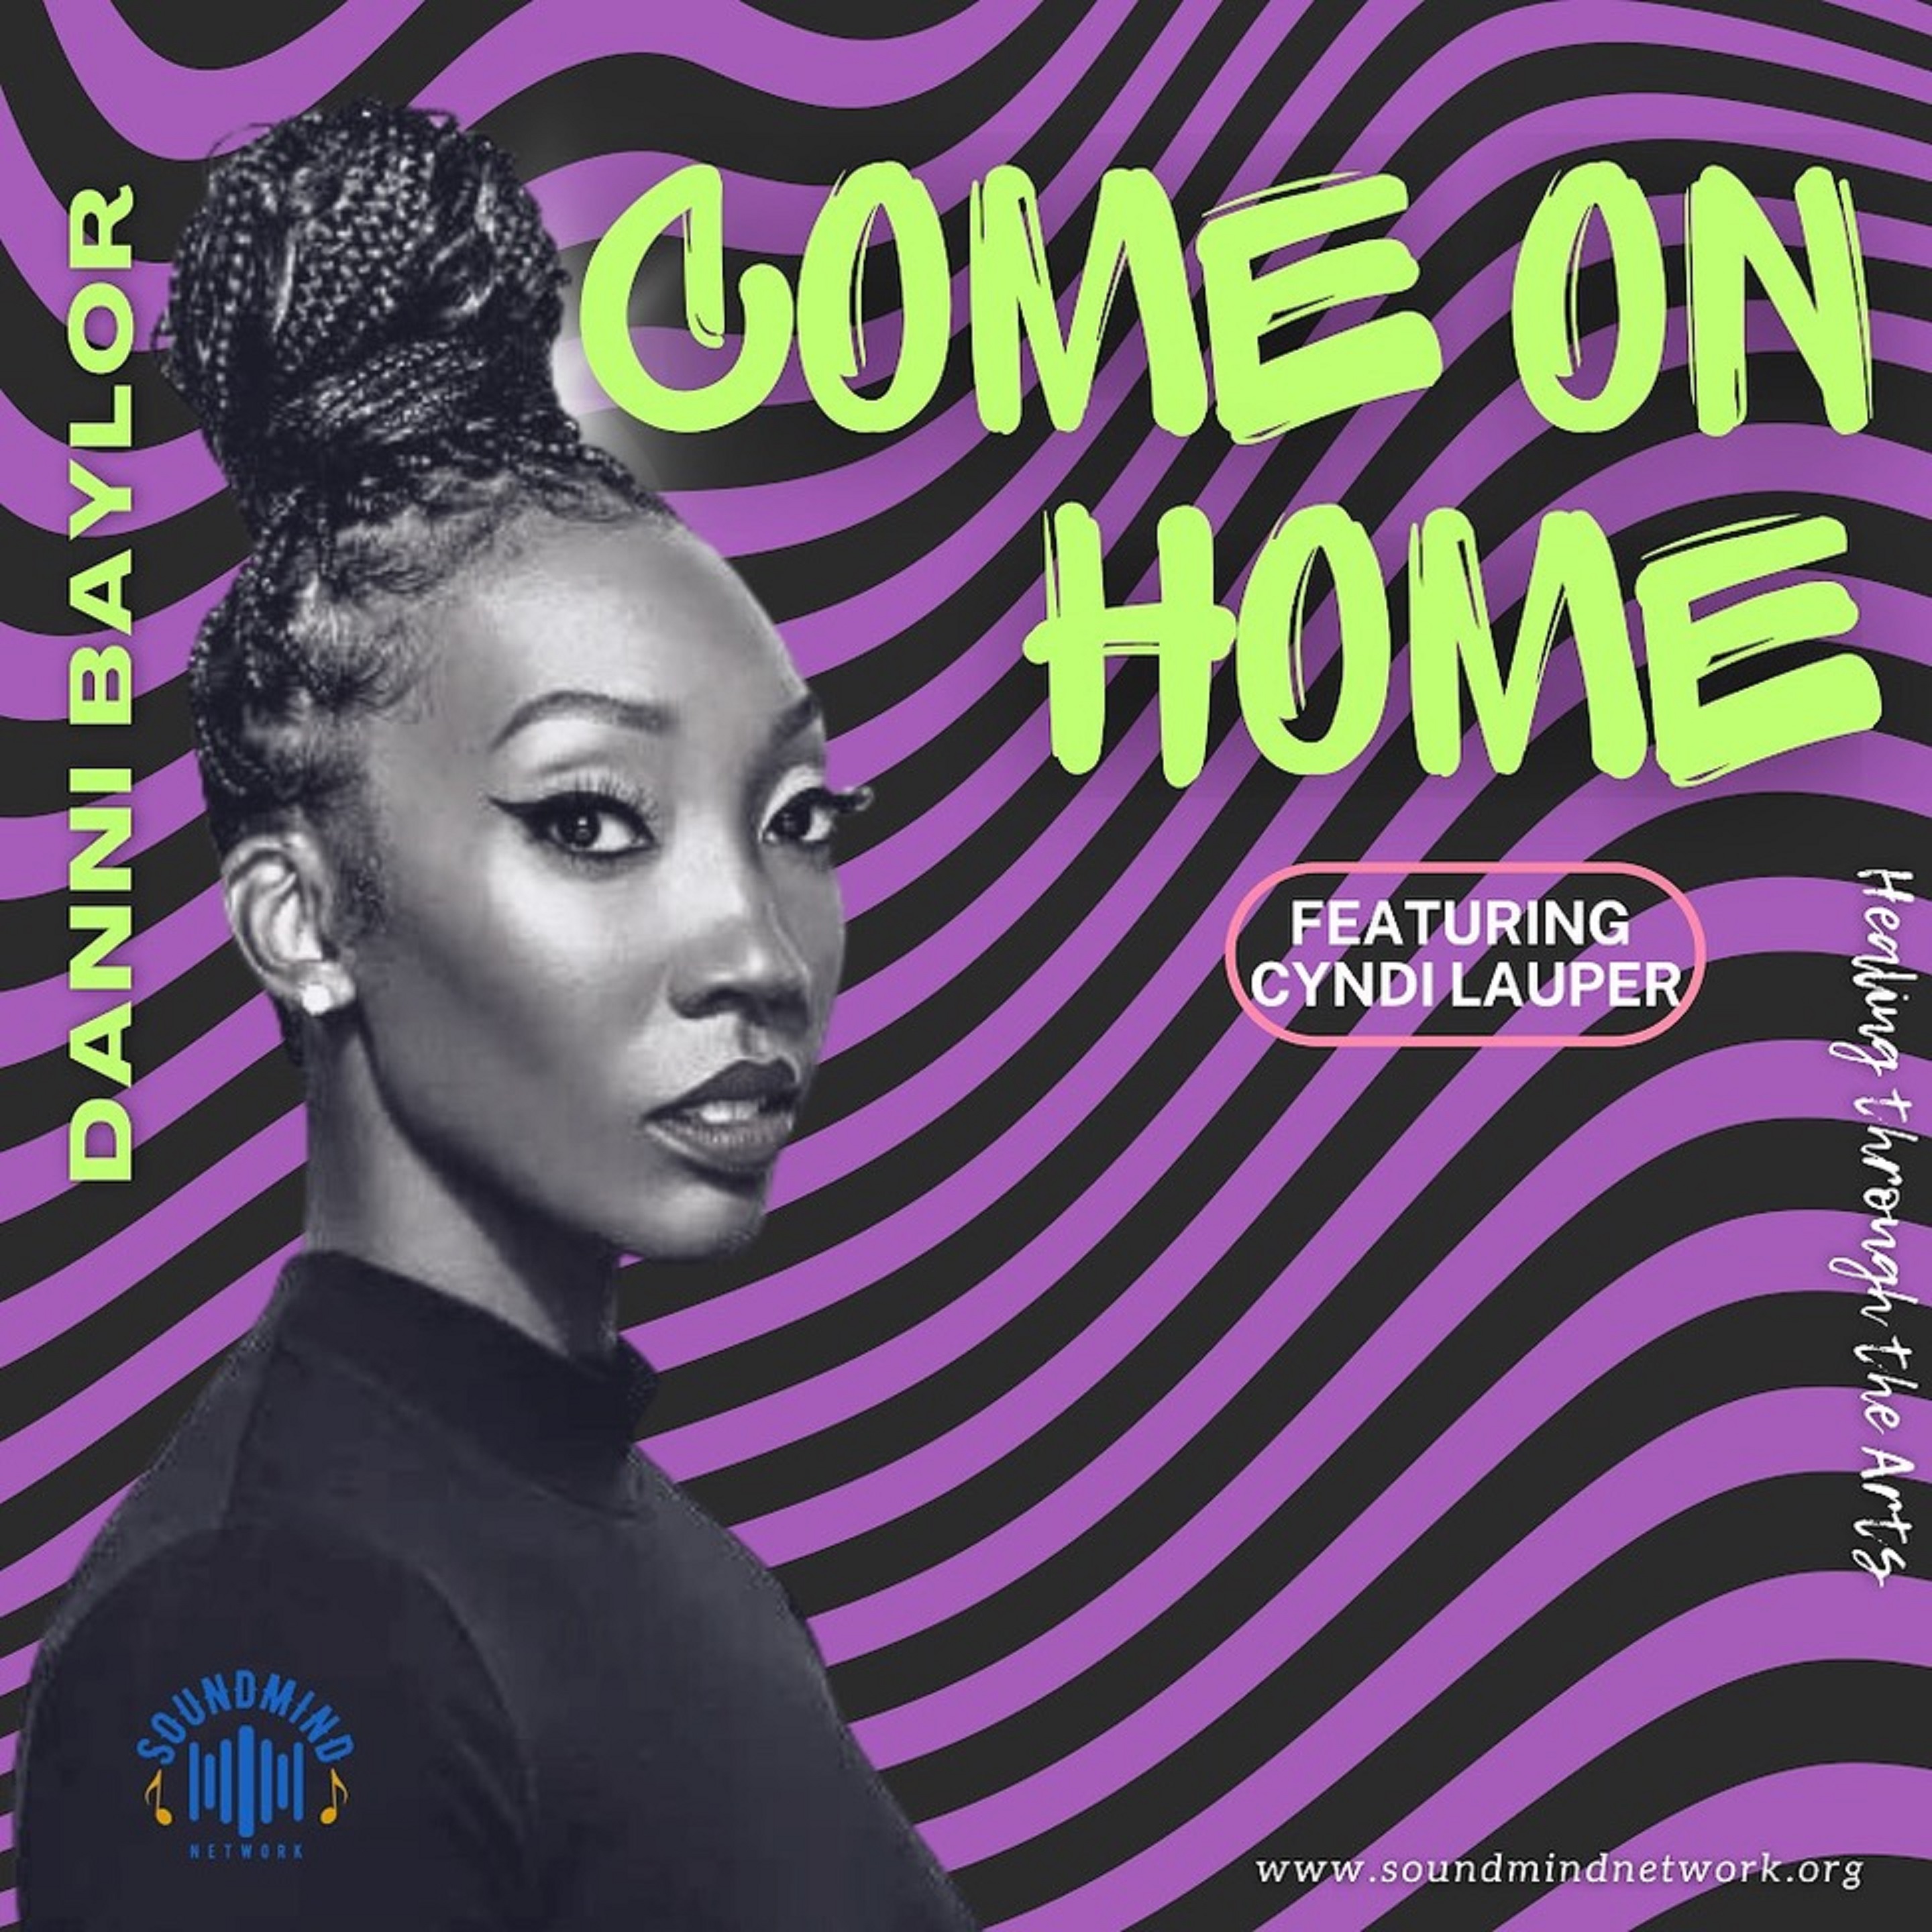 NEW RECORDING OF GRAMMY-WINNER CYNDI LAUPER’S "COME ON HOME" TO BENEFIT MENTAL HEALTH AND DRUG ADDICTION NON-PROFIT SOUND MIND NETWORK OUT ON SEPT. 1